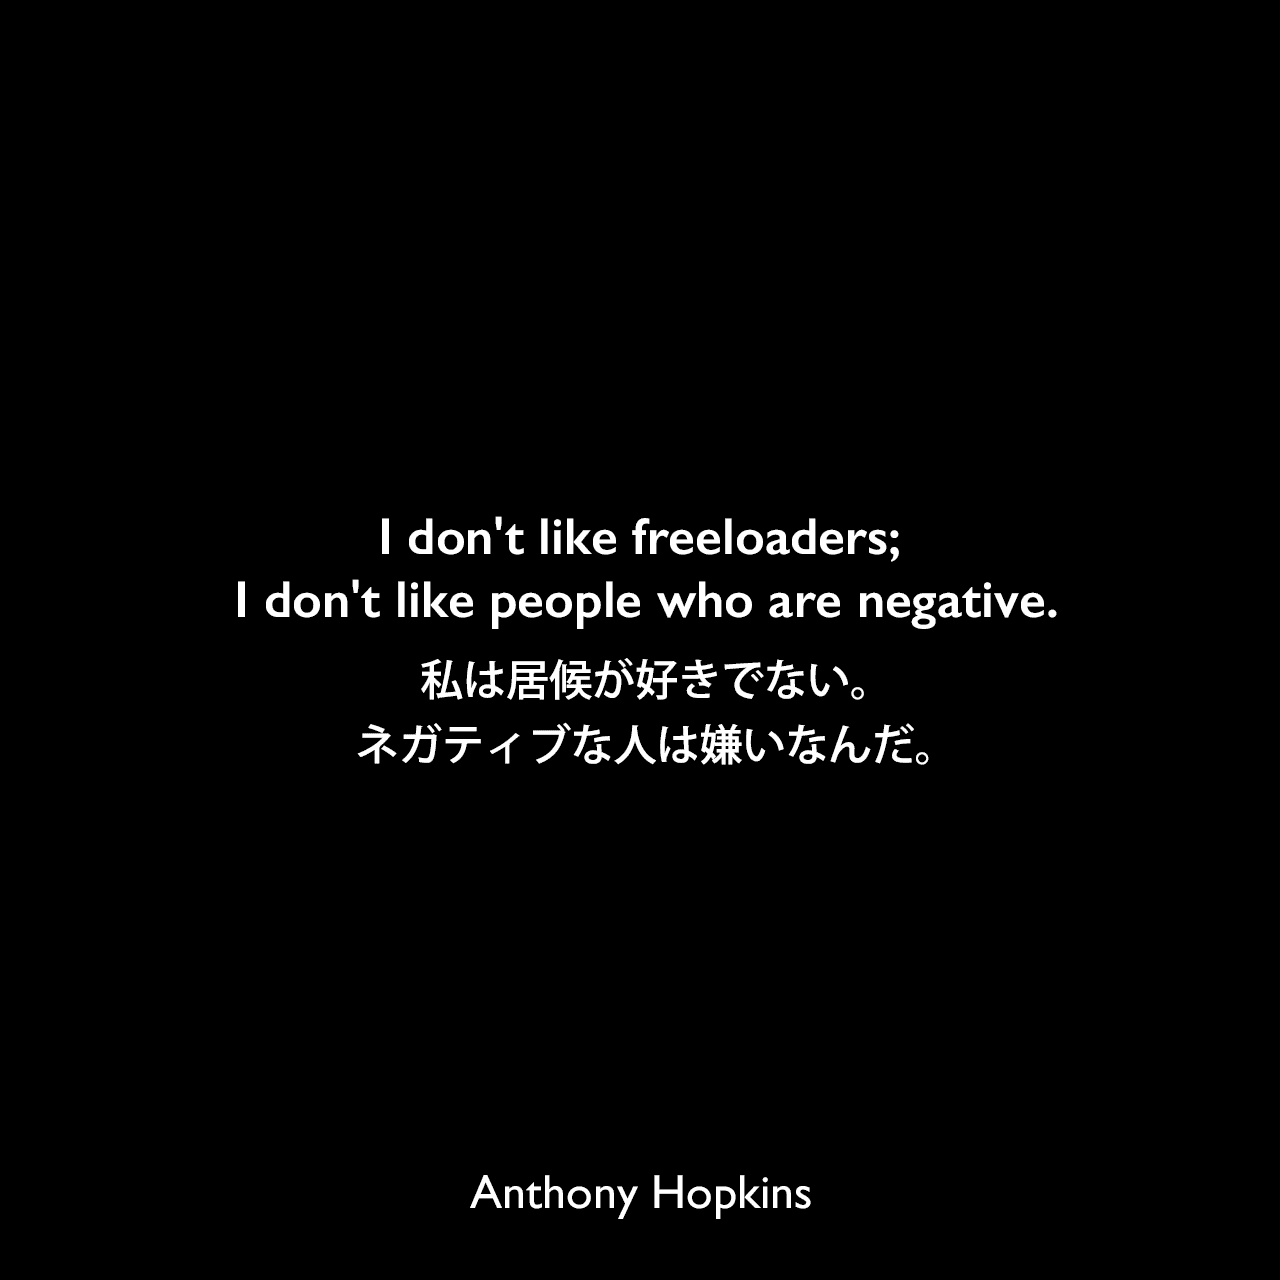 I don't like freeloaders; I don't like people who are negative.私は居候が好きでない。ネガティブな人は嫌いなんだ。Anthony Hopkins